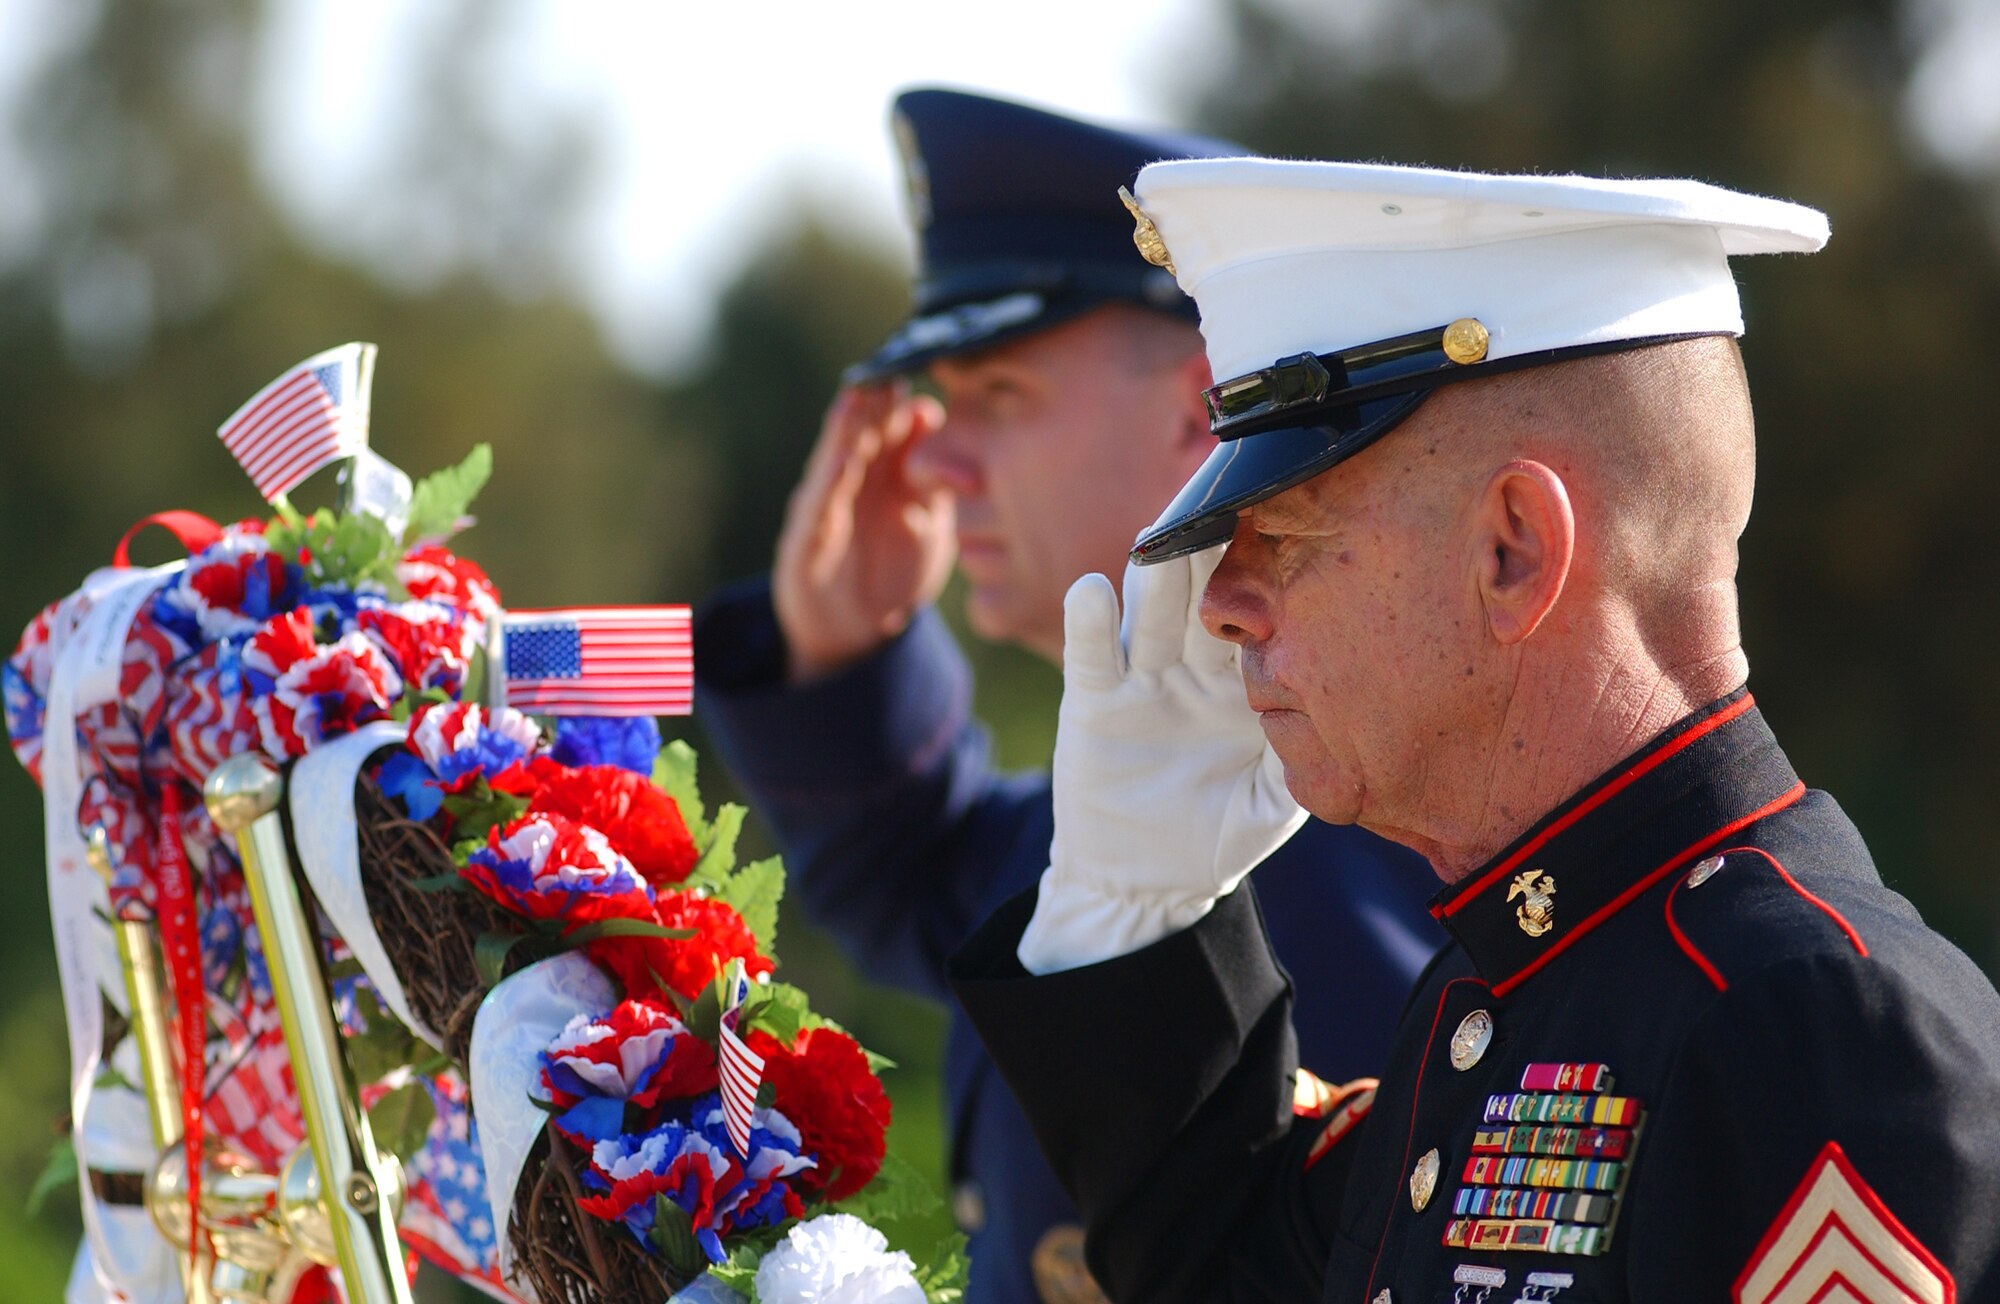 Marine Sgt. Maj. (Ret.) Peter Gorczewski and Col. Manson O. Morris, 18th Wing vice commander, salute after the wreath laying during a Memorial Day ceremony at Kadena Air Base, Japan, May 26. Veterans and military members from all four branches of the military attended the event to remember those who died in our nation's service. (U.S. Air Force photo/Tech. Sgt. Rey Ramon)